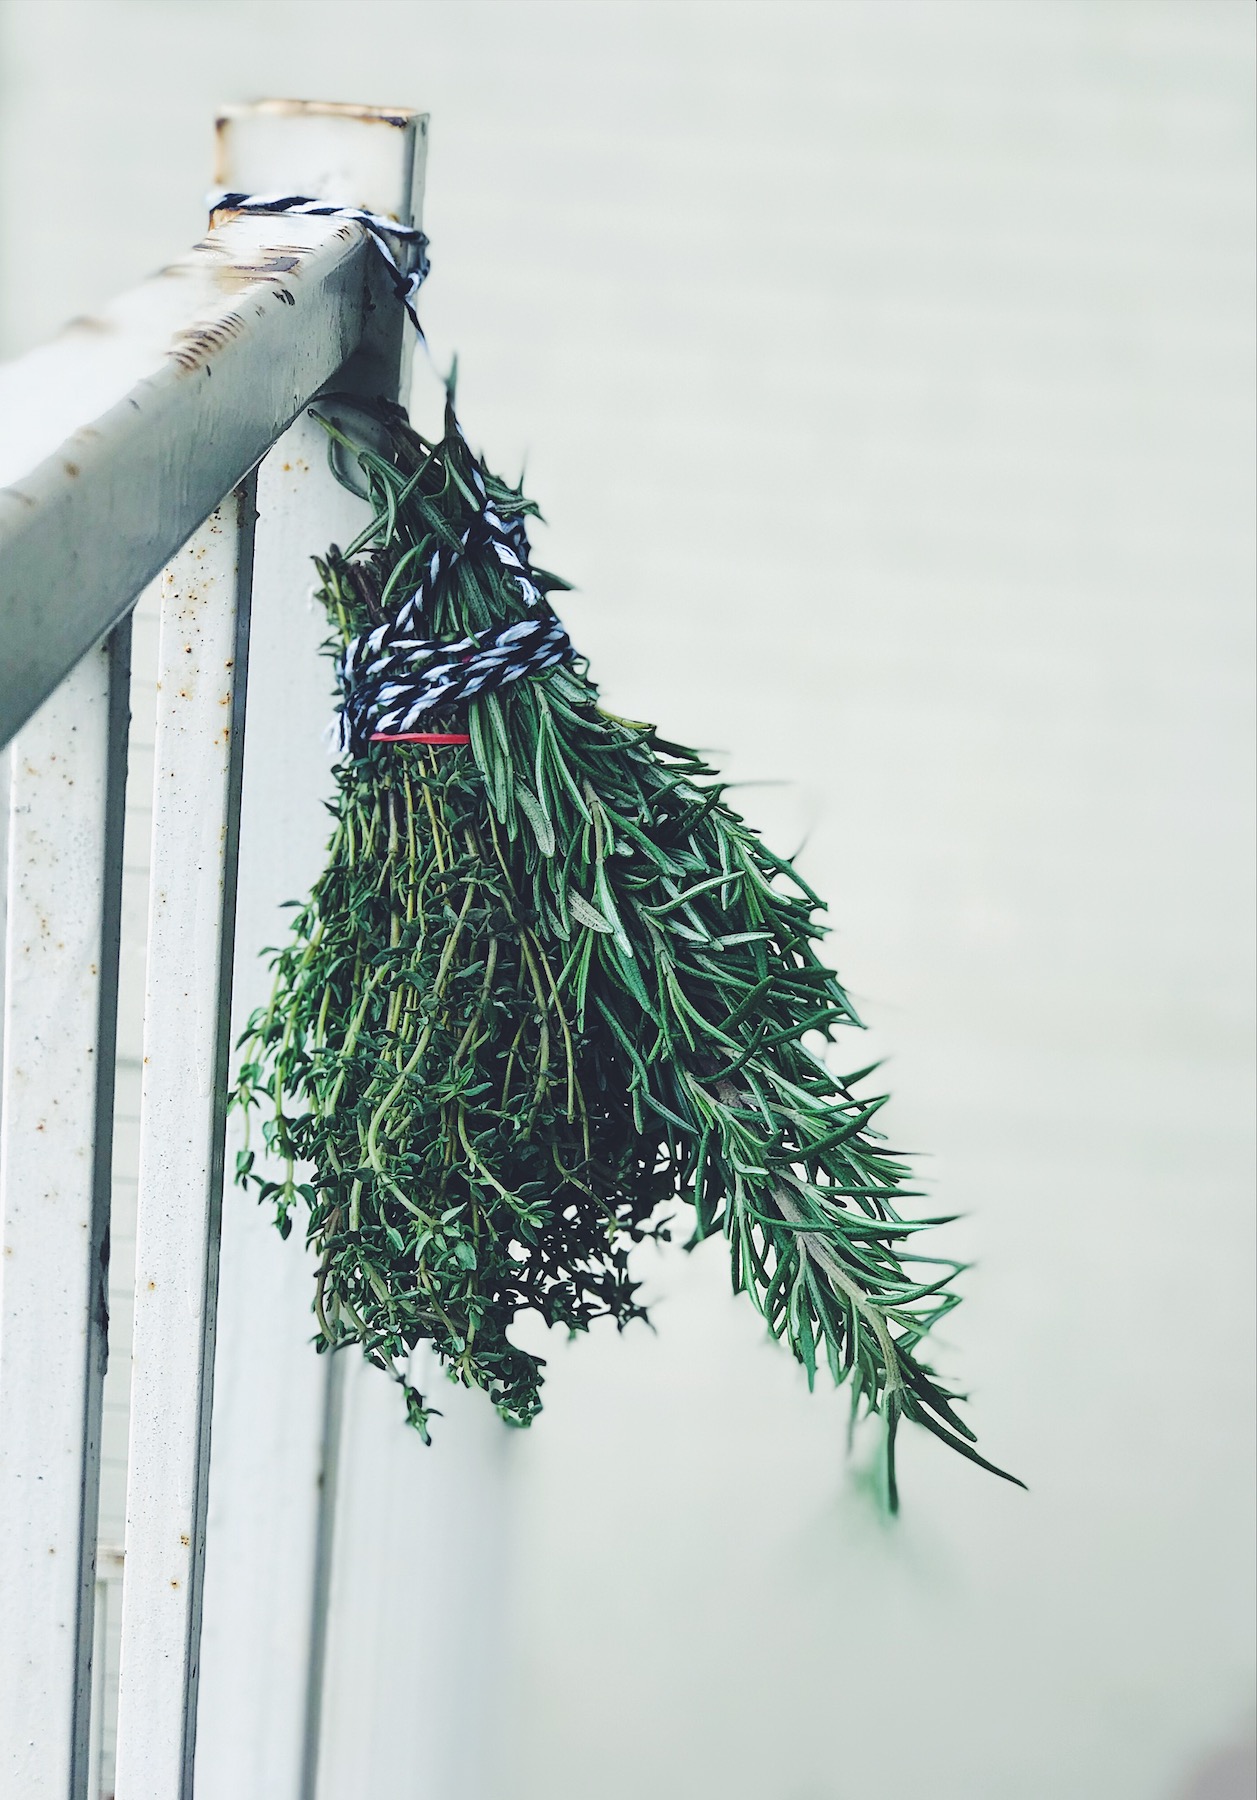 herbs hanging to dry